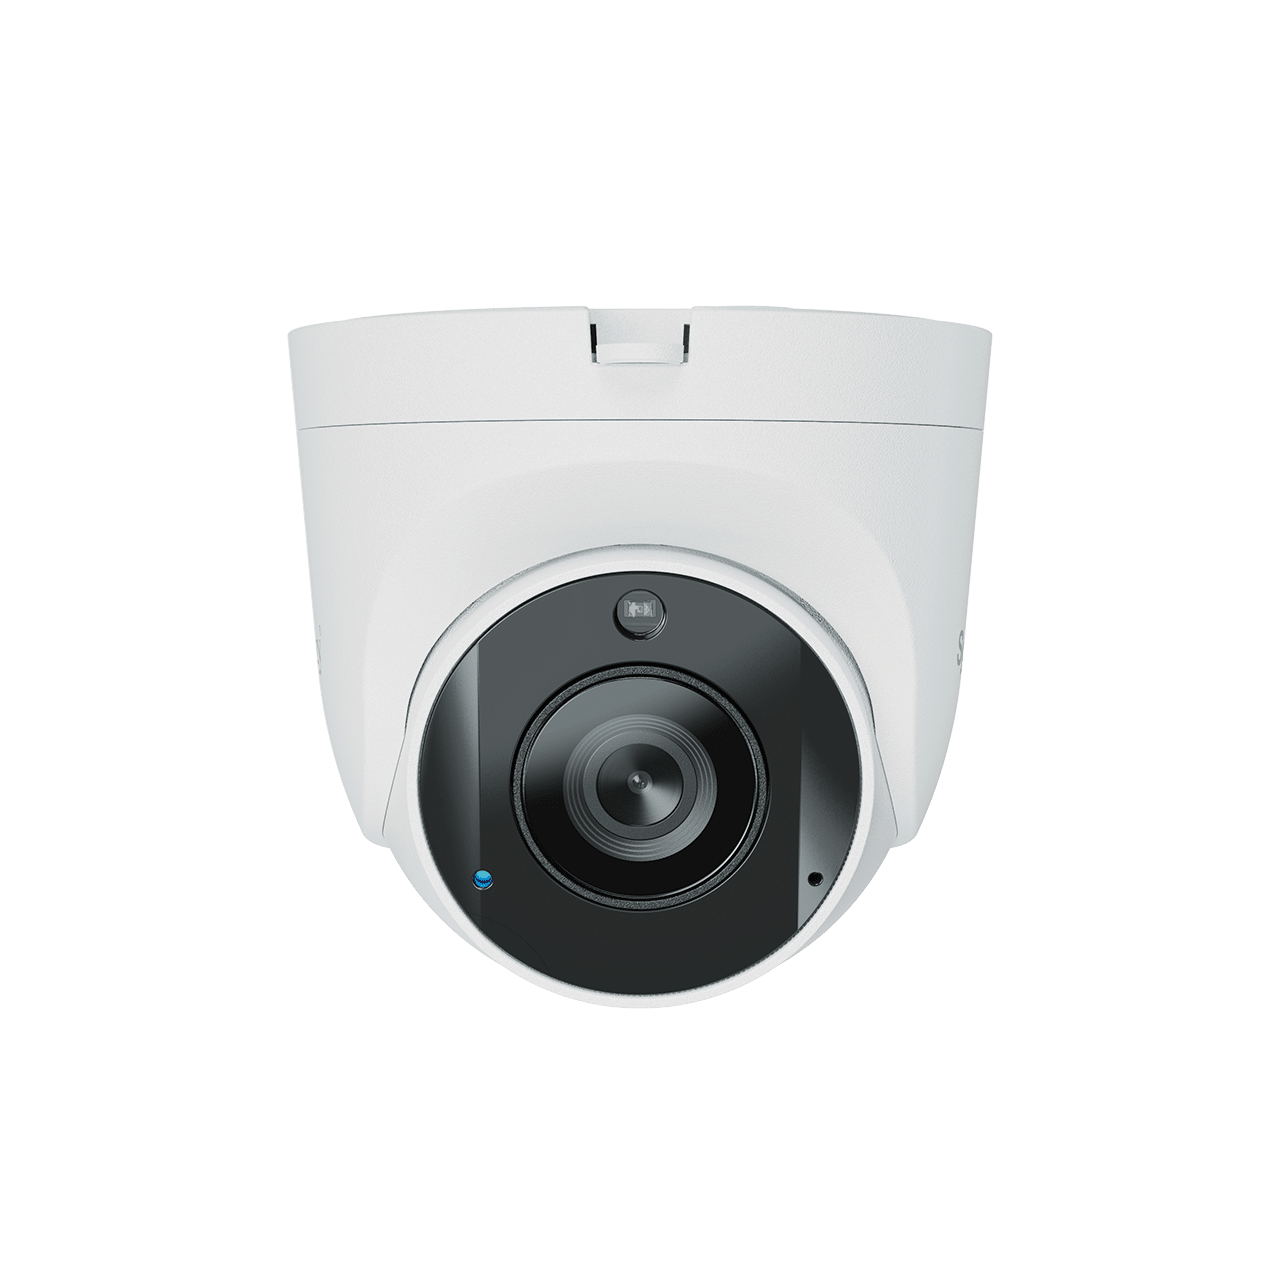 New Synology Surveillance BC500 and TC500 Cameras Revealed